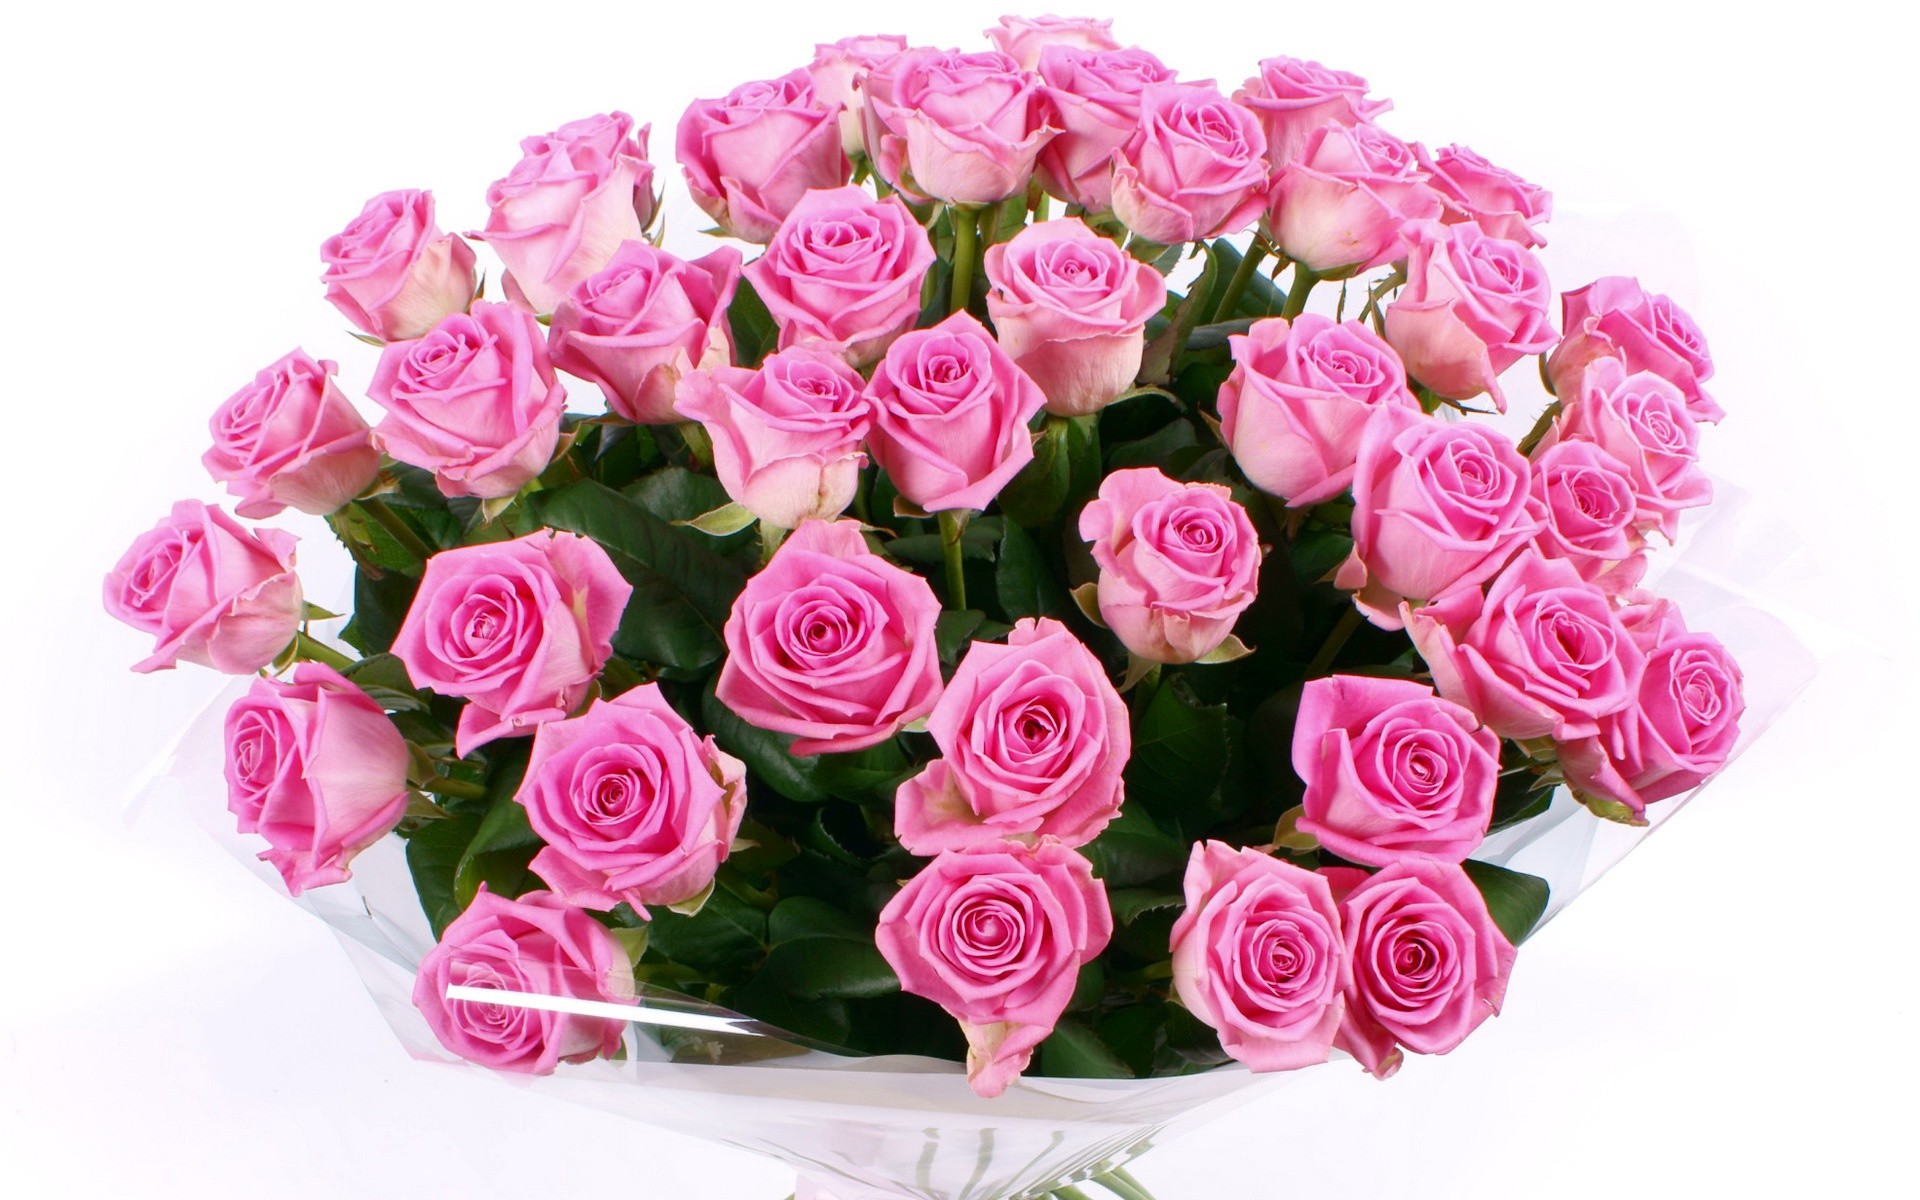 1920x1200 The language of love pink roses beautifull pink rose hd wallpapers.